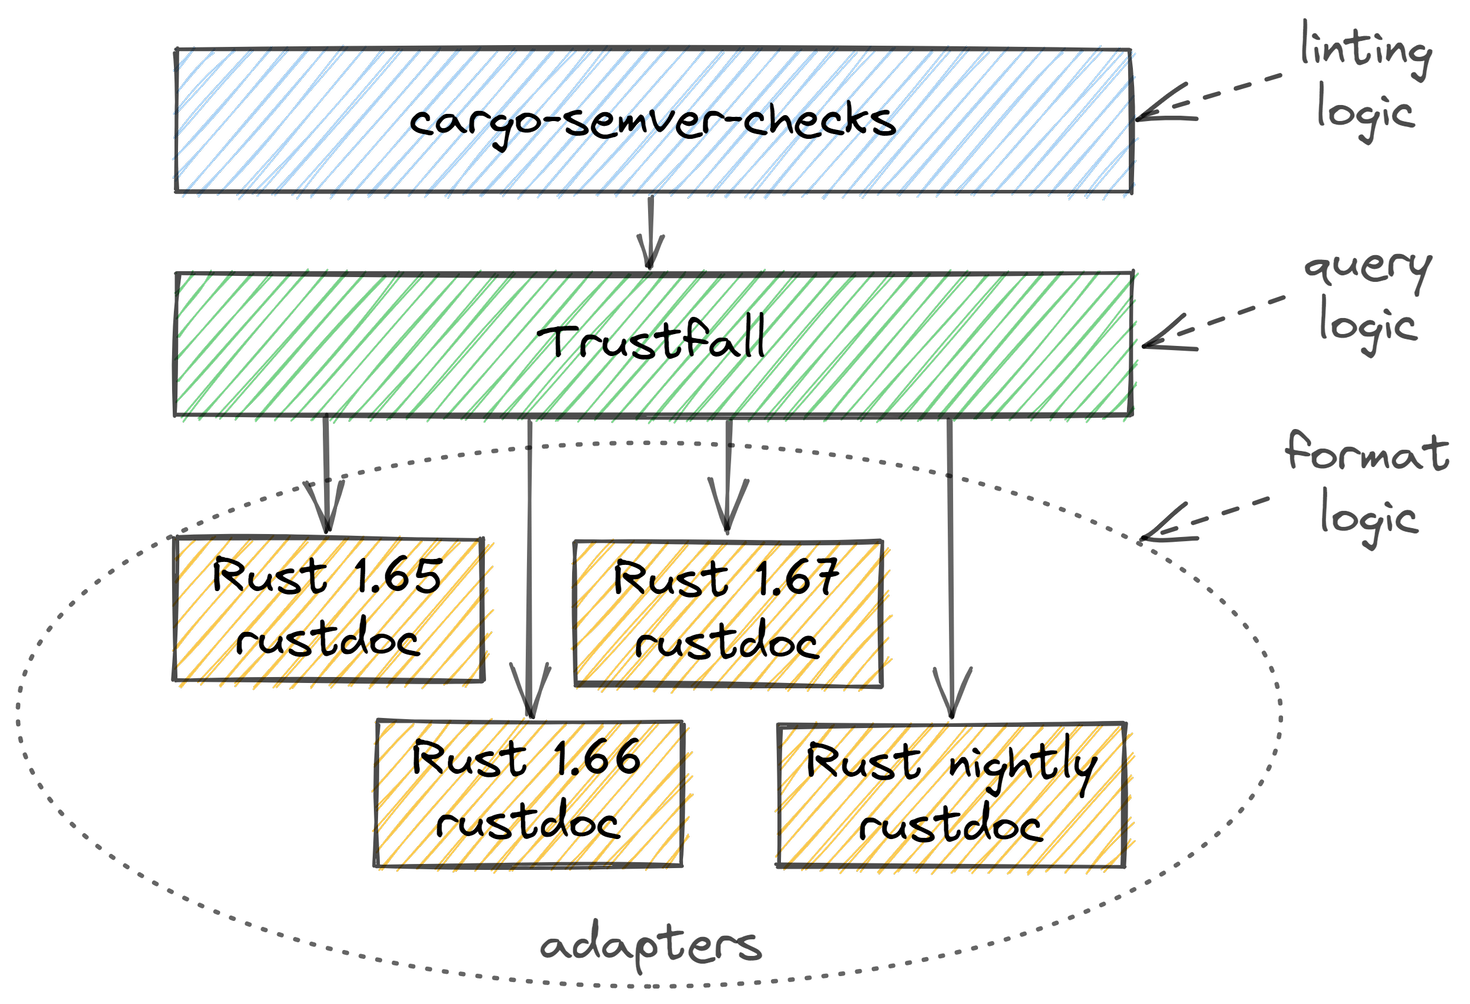 A diagram with three layers of blocks stacked on top of each other. The top layer is cargo-semver-checks, handling the linting logic. It sits on top of Trustfall, which handles the query logic. Trustfall sits on top of four side-by-side adapter blocks, each handling the data format logic for different Rust version's rustdoc format: Rust 1.65, 1.66, 1.67, and nightly.